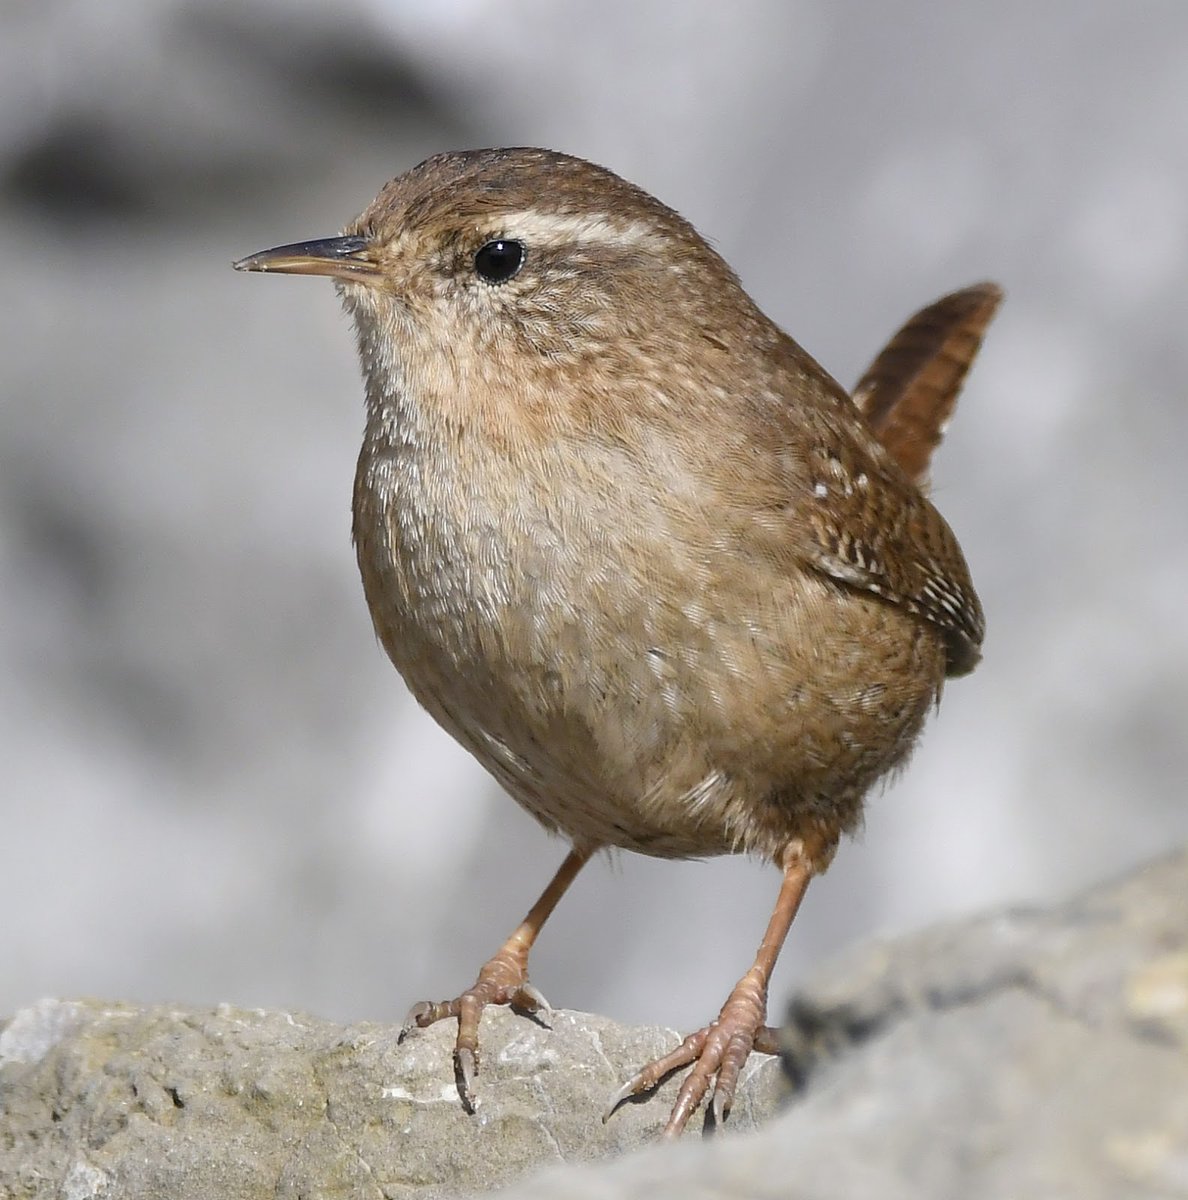 Wren. Tiny bird, often with a cocked tail. Has a very loud song!Easily missed, but is actually the most common bird in the UK.Doesn't visit bird tables. Feeds on insects and Spiders. #SelfIsolationBirdWatch 